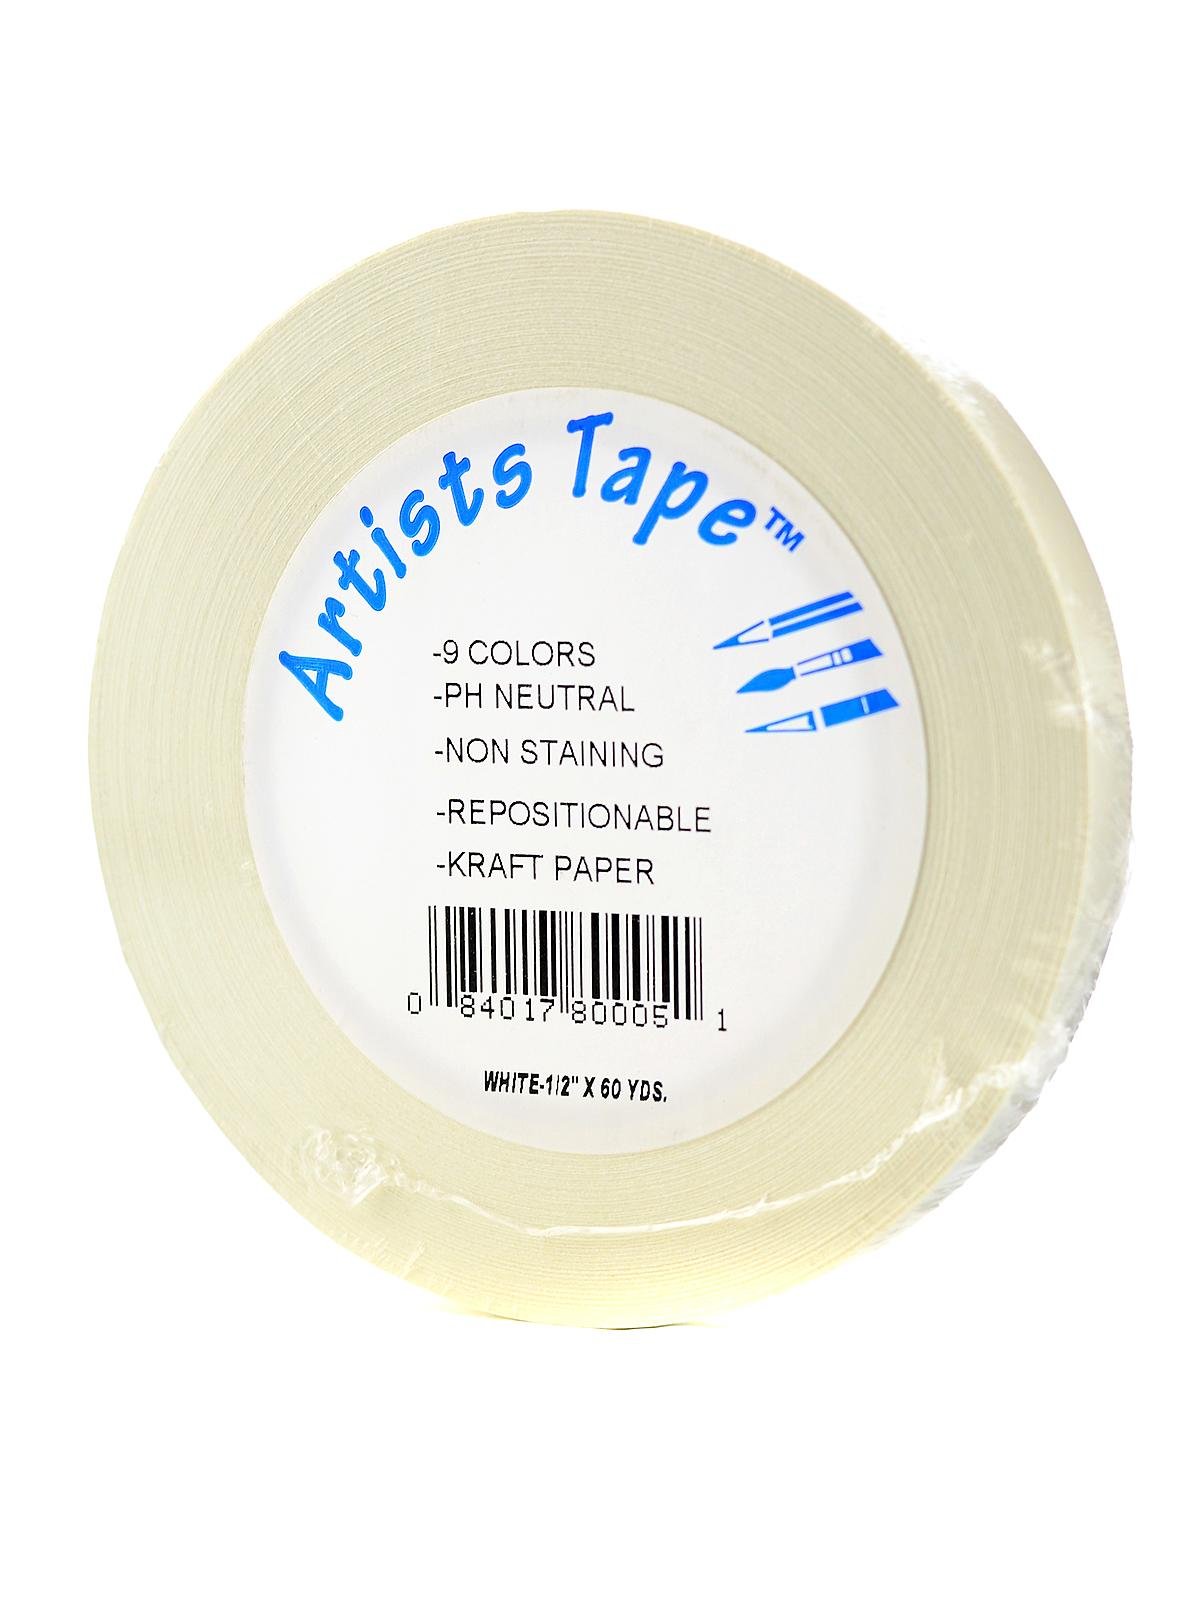  TSSART 3 Pack White Artist Tape - Masking Artists Tape for  Drafting Art Watercolor Painting Canvas Framing - Acid Free 0.2 Inch Wide  180FT Long : Arts, Crafts & Sewing